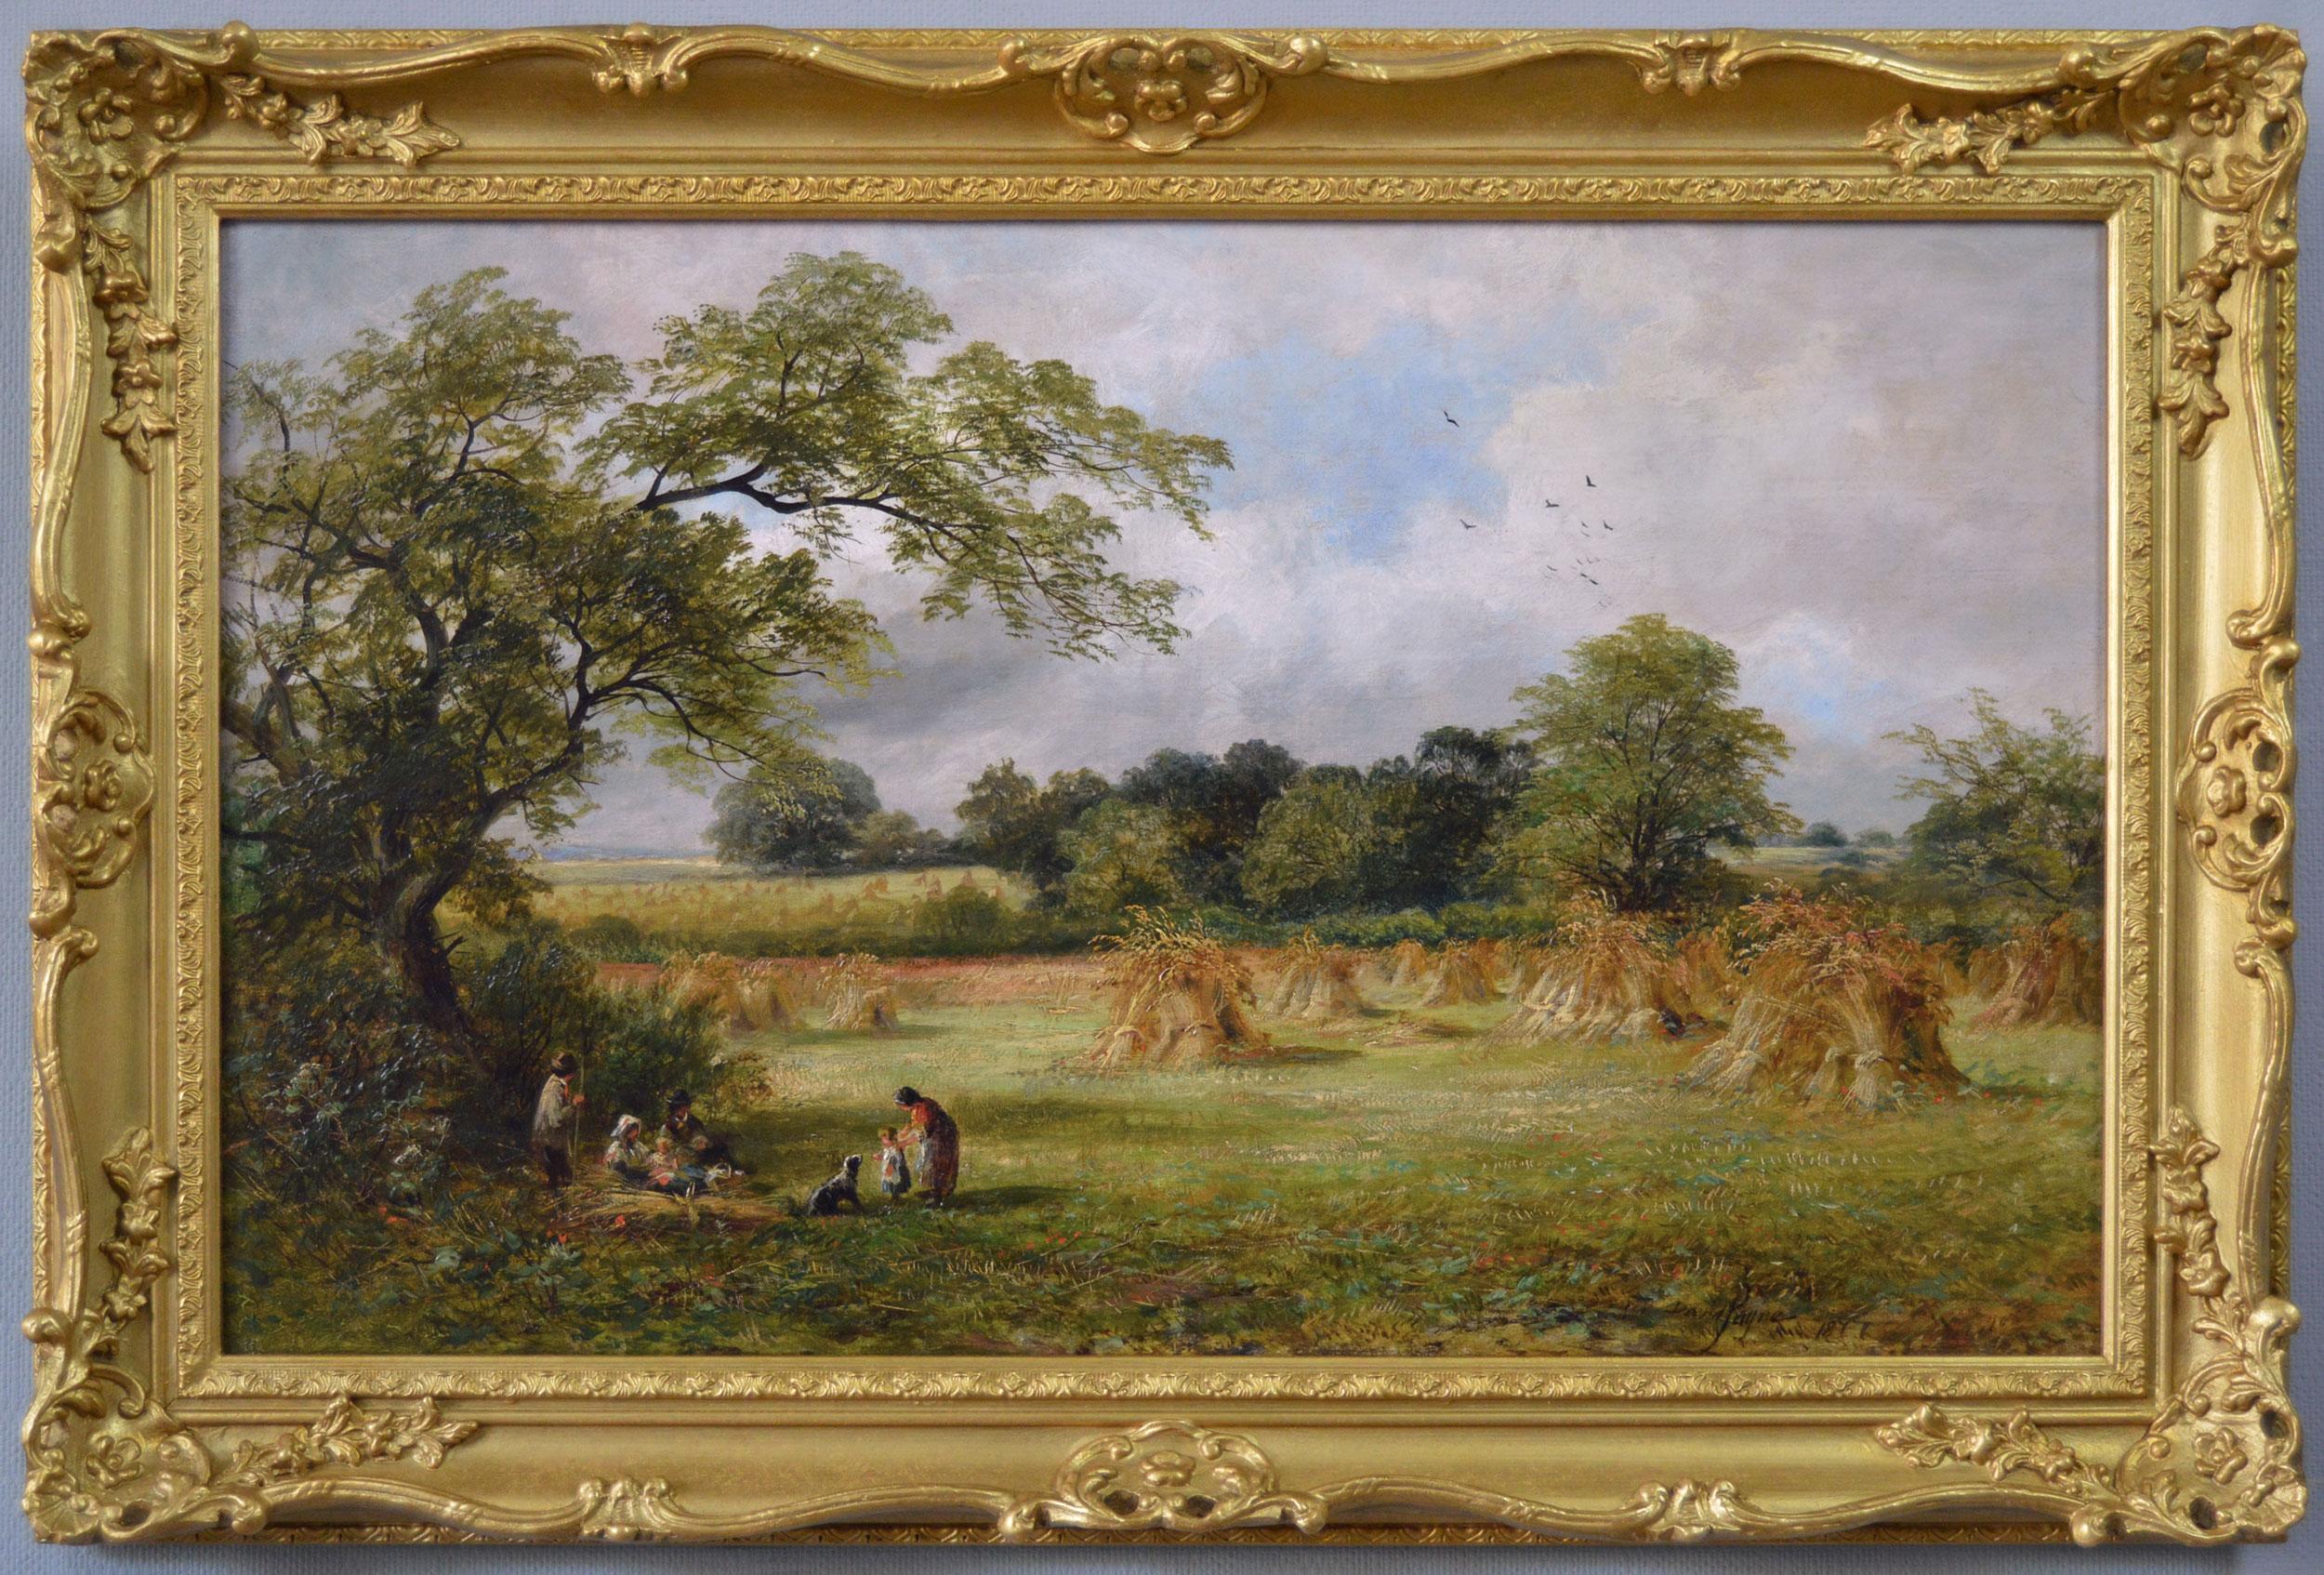 David Payne Figurative Painting - 19th Century landscape oil painting of figures in a Cornfield